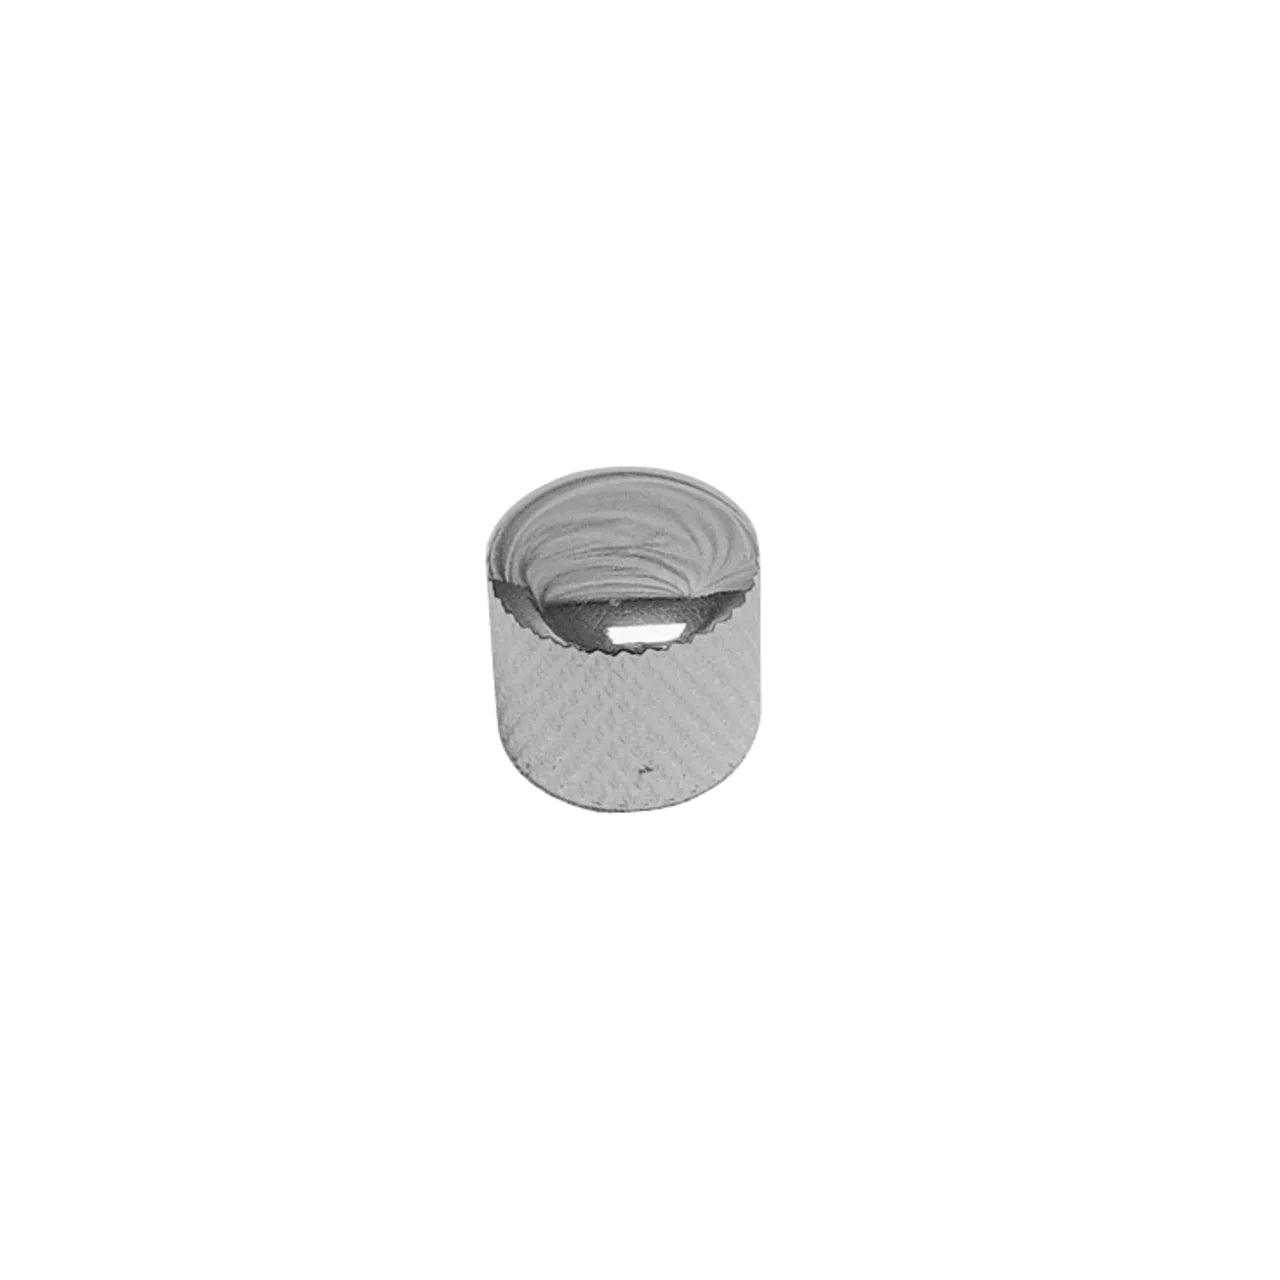 Control Knob Dome Top Chrome Push Fit - Guitars - Parts and Accessories by Dr Parts at Muso's Stuff